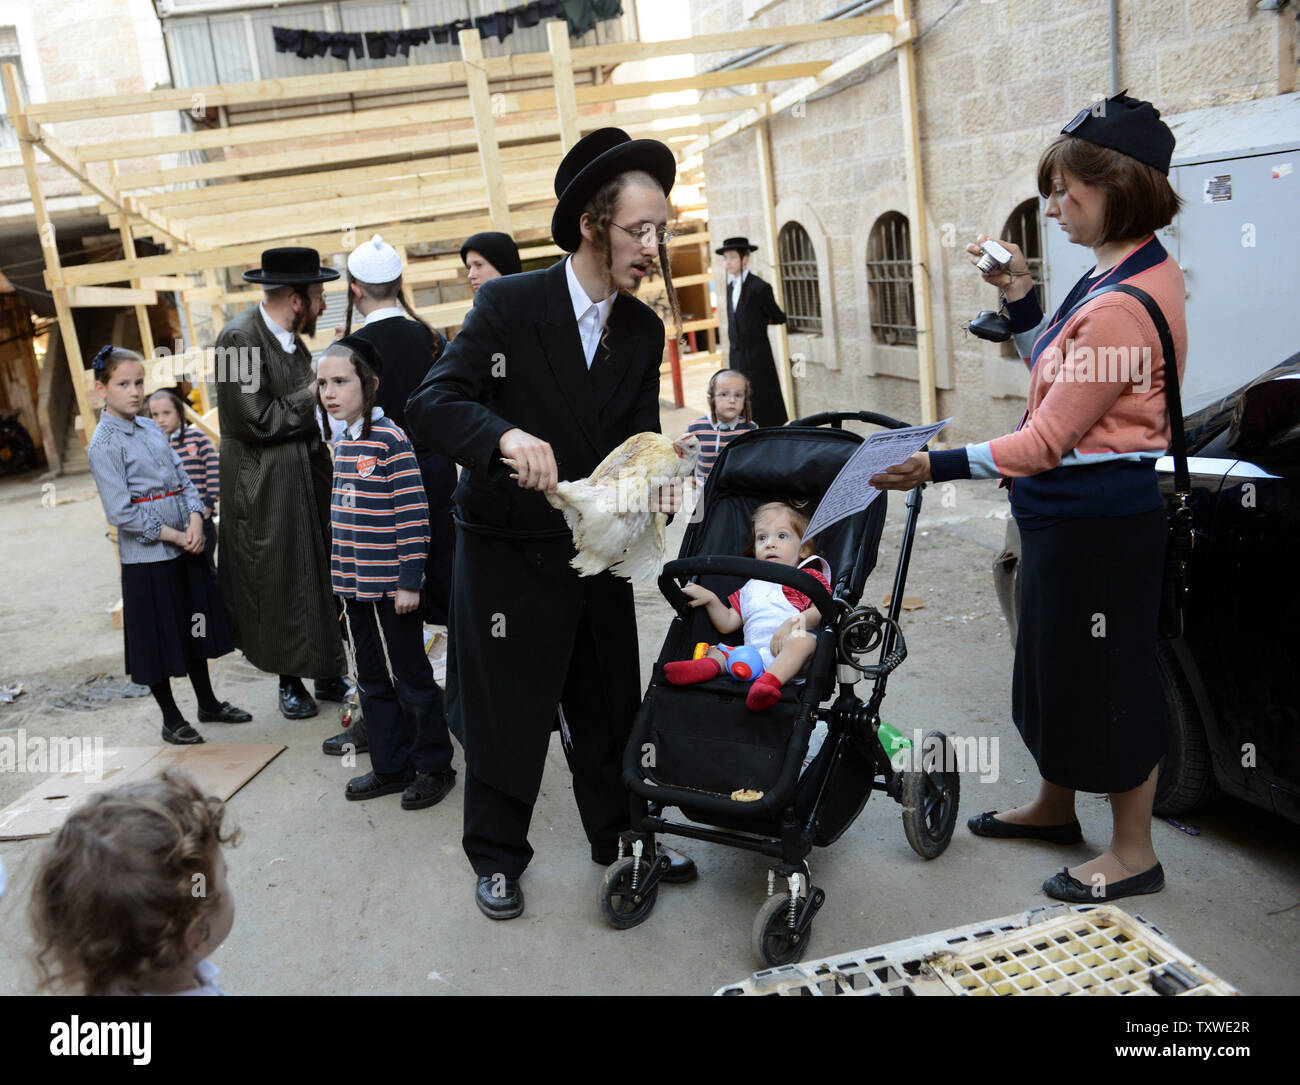 An Ultra-Orthodox Jewish man swings a chicken over a baby in a stroller during the "Kaparot" ceremony in the Mea Shearim neighborhood in Jerusalem, September 23, 2012. Religious Jews prepare for Yom Kippur by performing the ritual of "Kaparot" by reciting a prayer to transfer their sins from the last year to the chicken. Yom Kippur is the holiest day in the Jewish calendar and begins at sunset on September 25. UPI/Debbie Hill Stock Photo